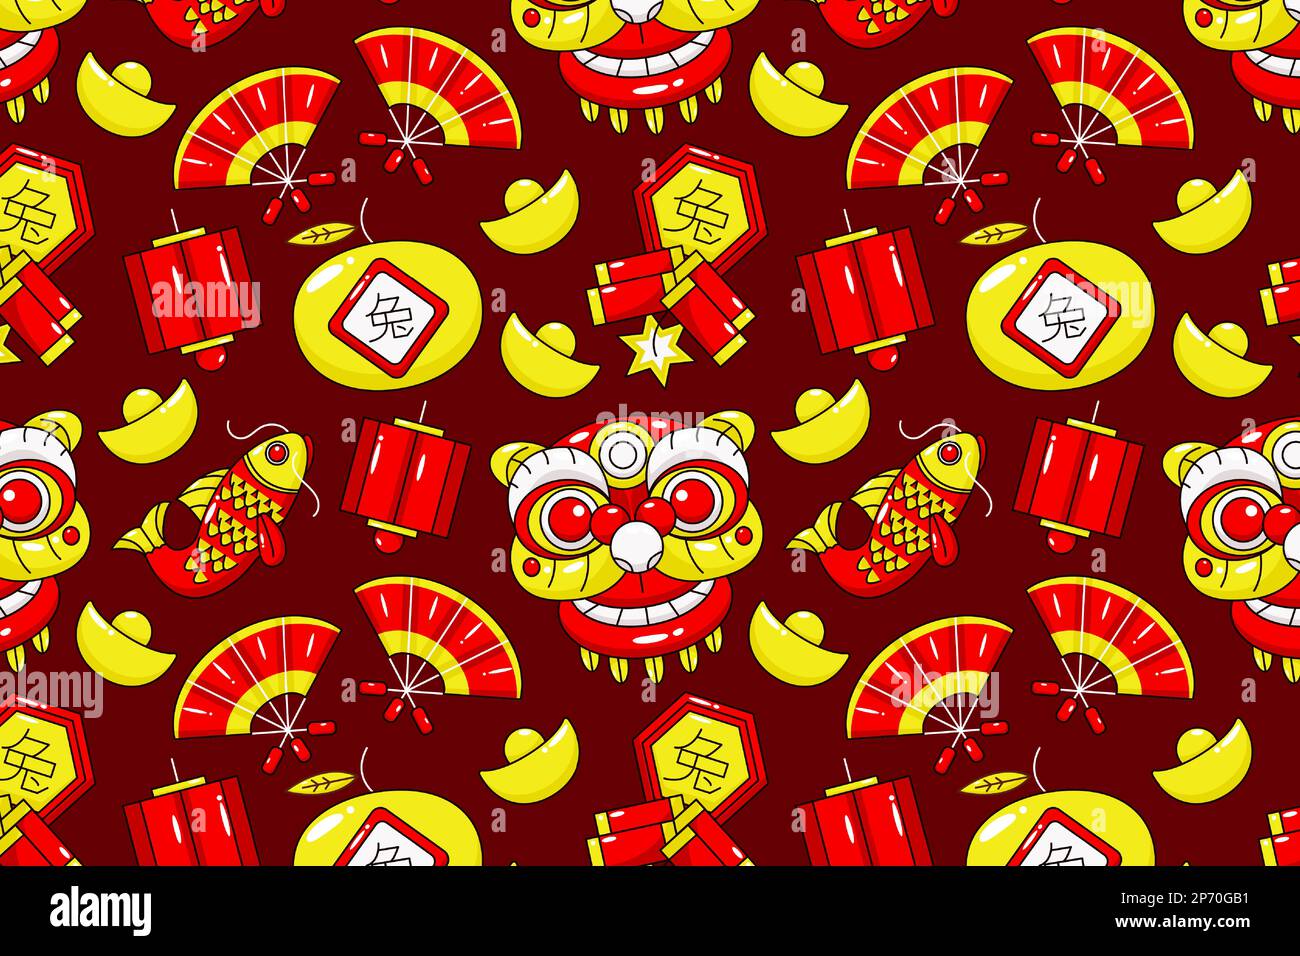 Chinese new year icon pattern. Dragons, lanterns, gold, koi fish and firecrackers Stock Vector